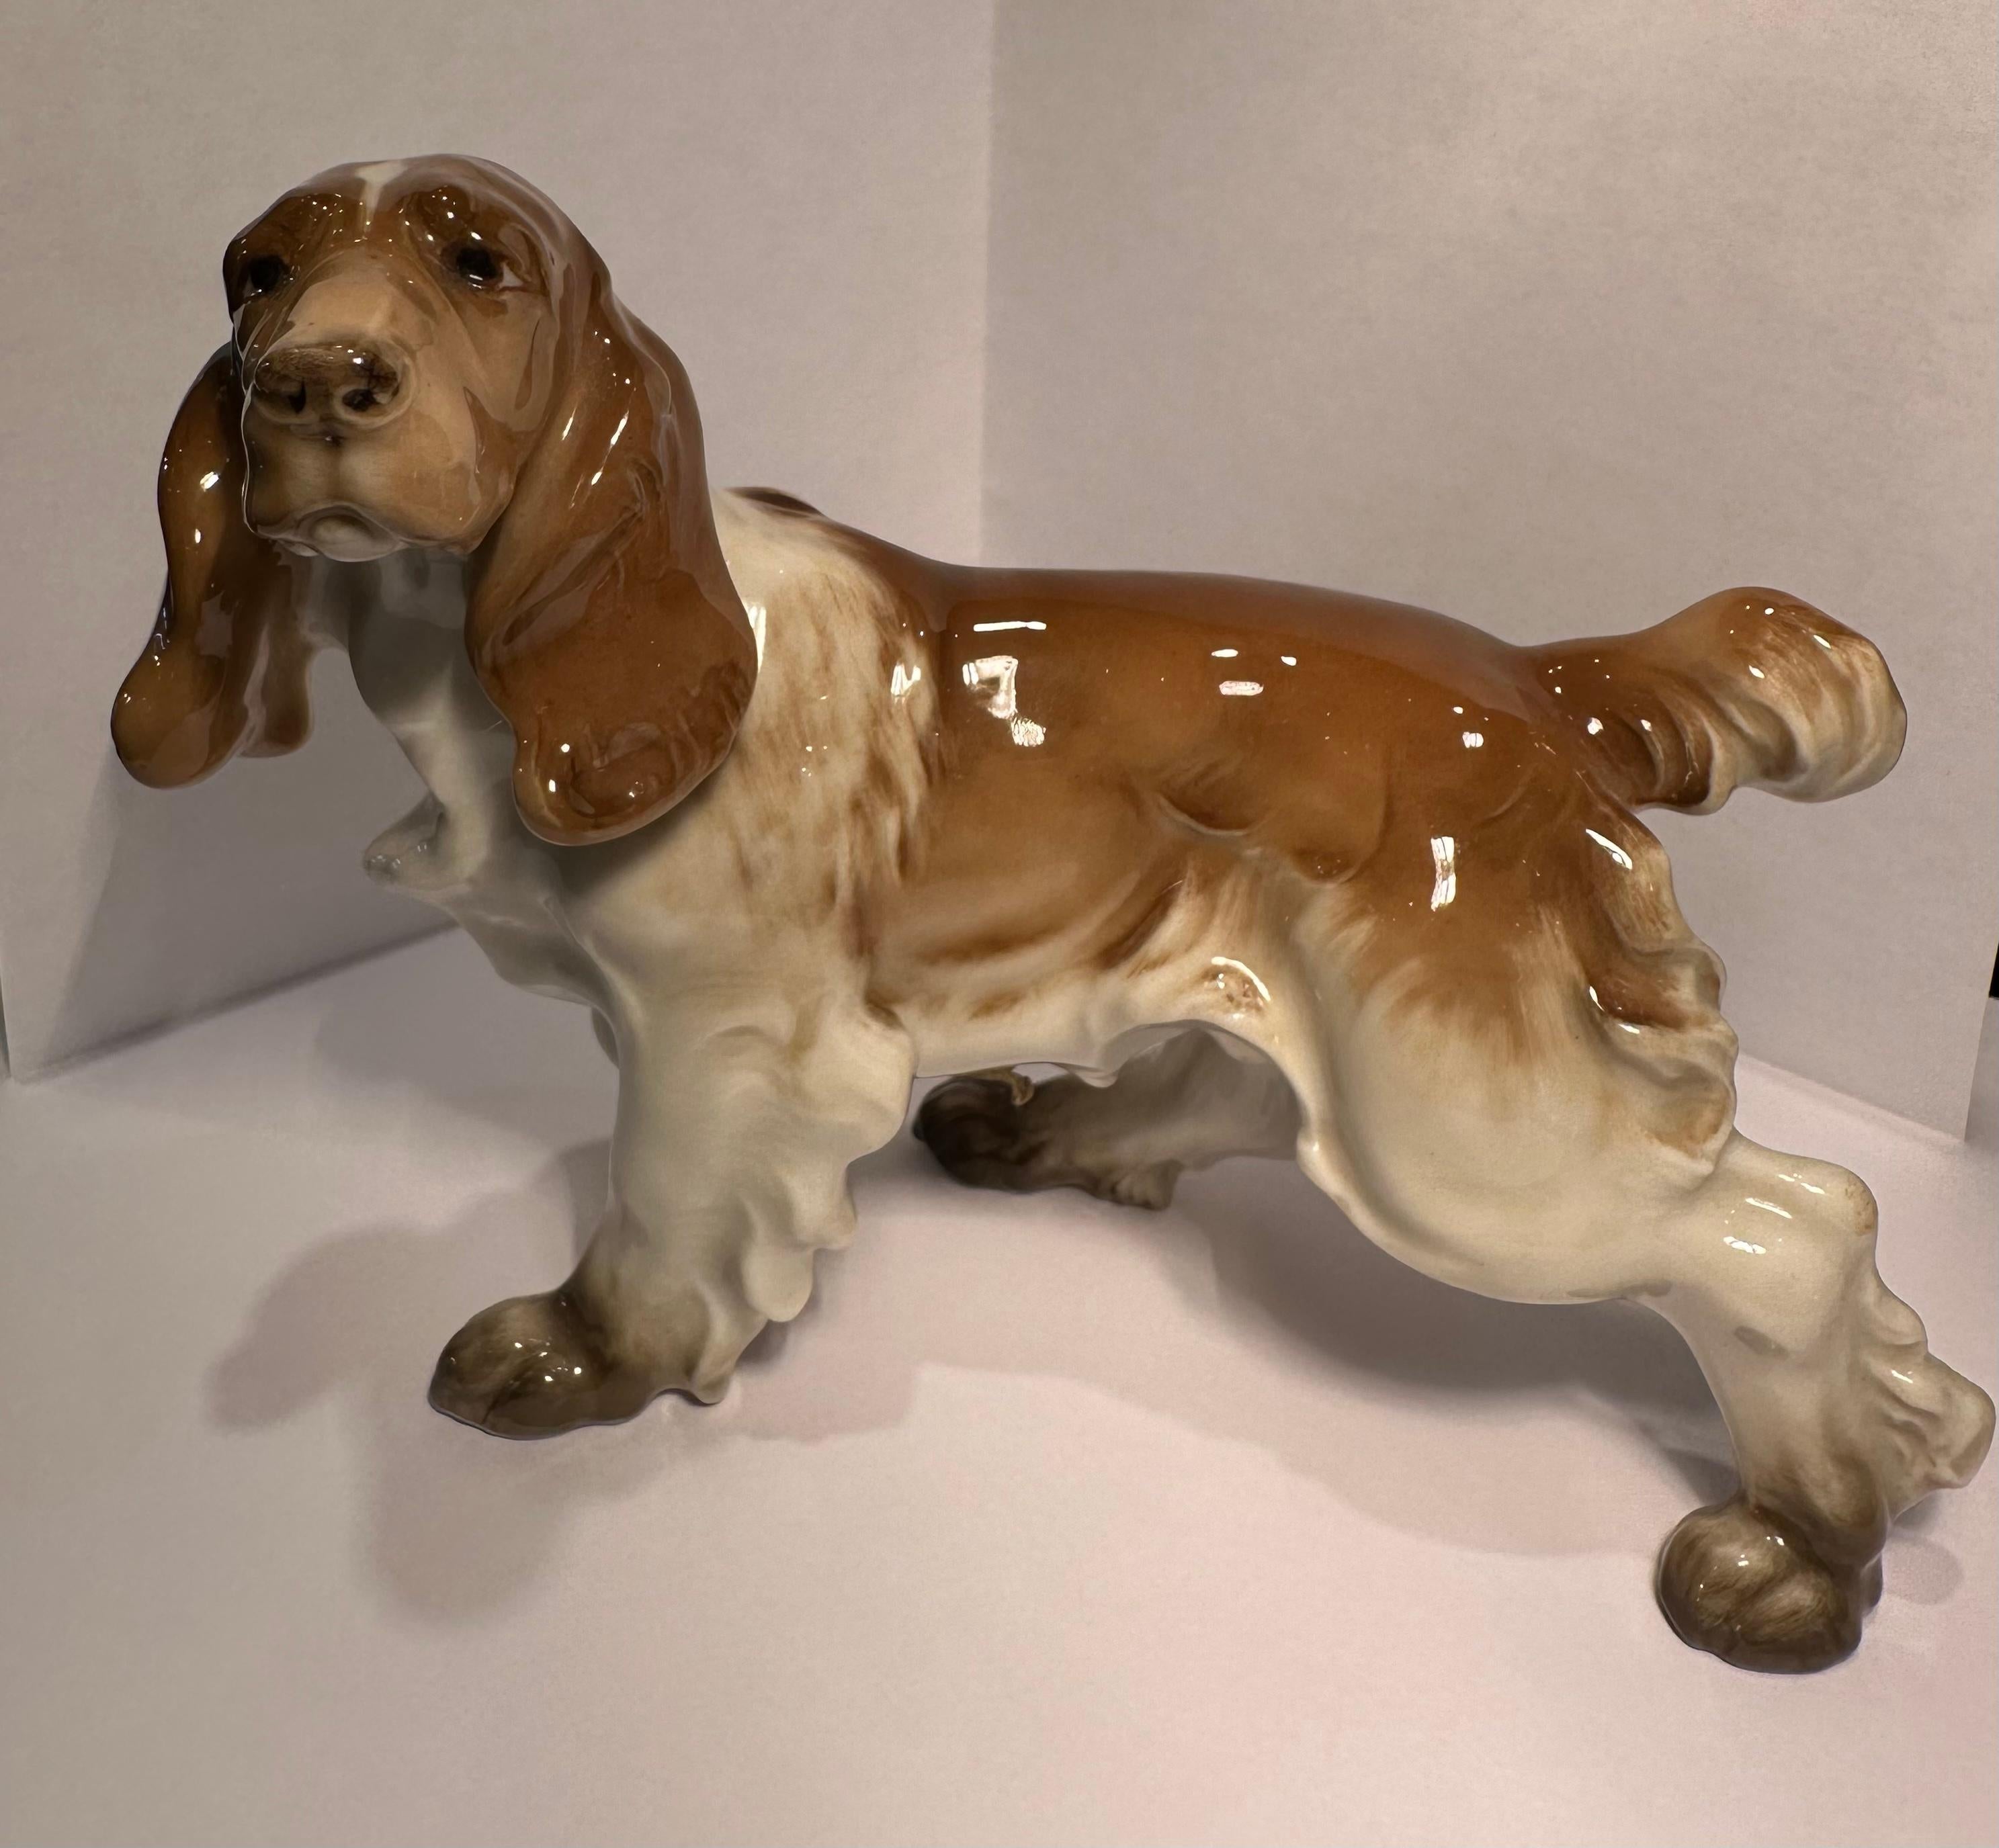 Hand-Painted Finest Quality Hutschenreuther Germany Porcelain Cocker Spaniel Dog Figurine.